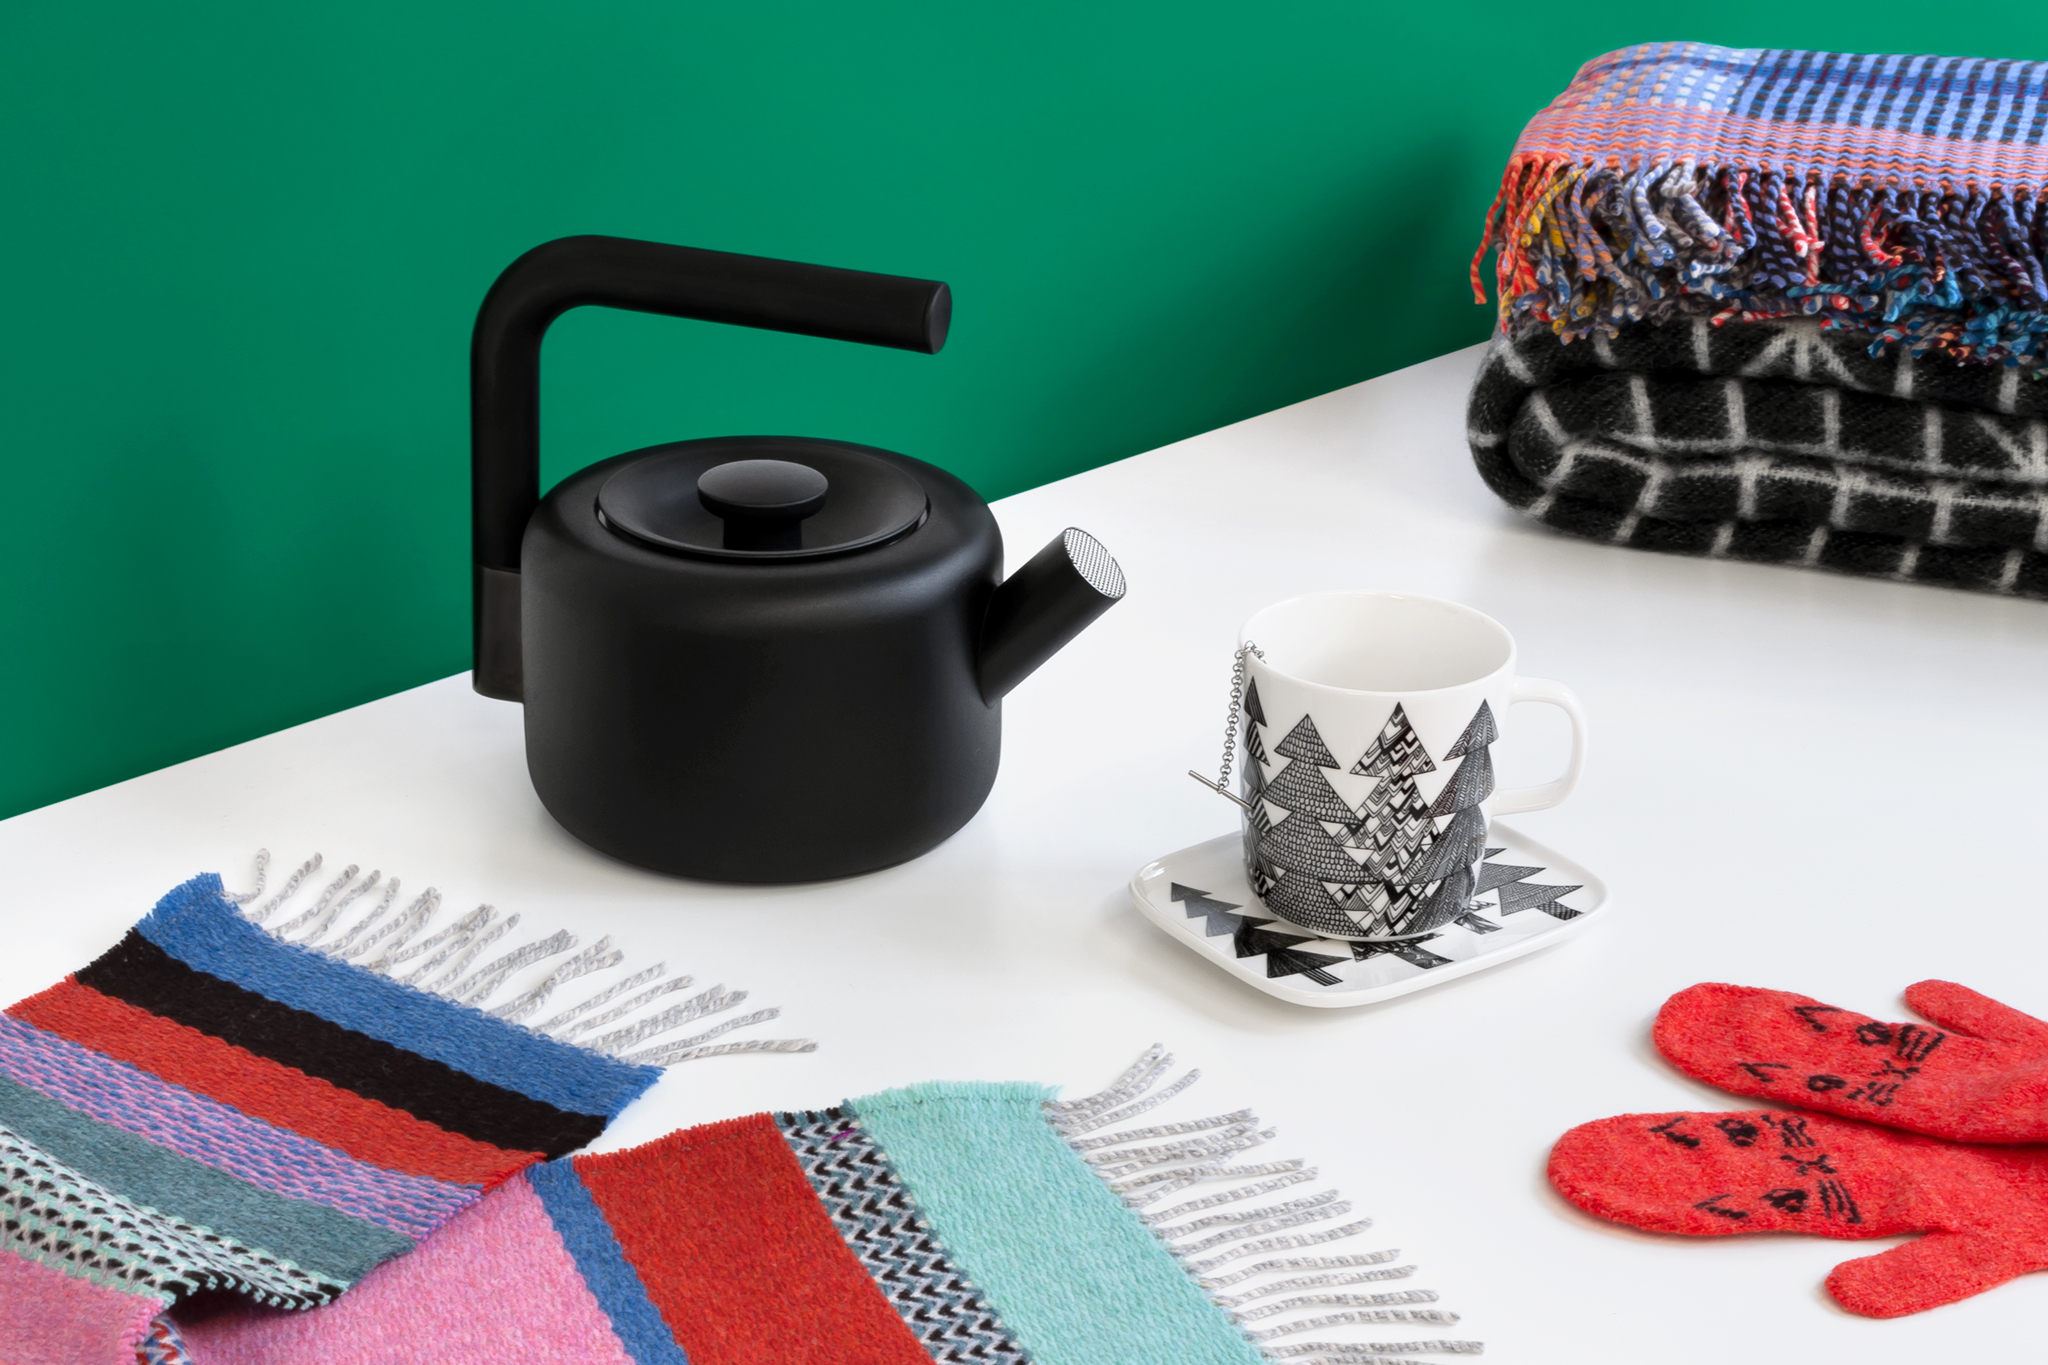 A modern black teapot faces a white mug illustrated with spruce trees on a matching dish. They are surrounded by a colorful striped scarf, orange mittens with cat faces, and a stack of blankets, all on a white tabletop with an emerald green wall behind.